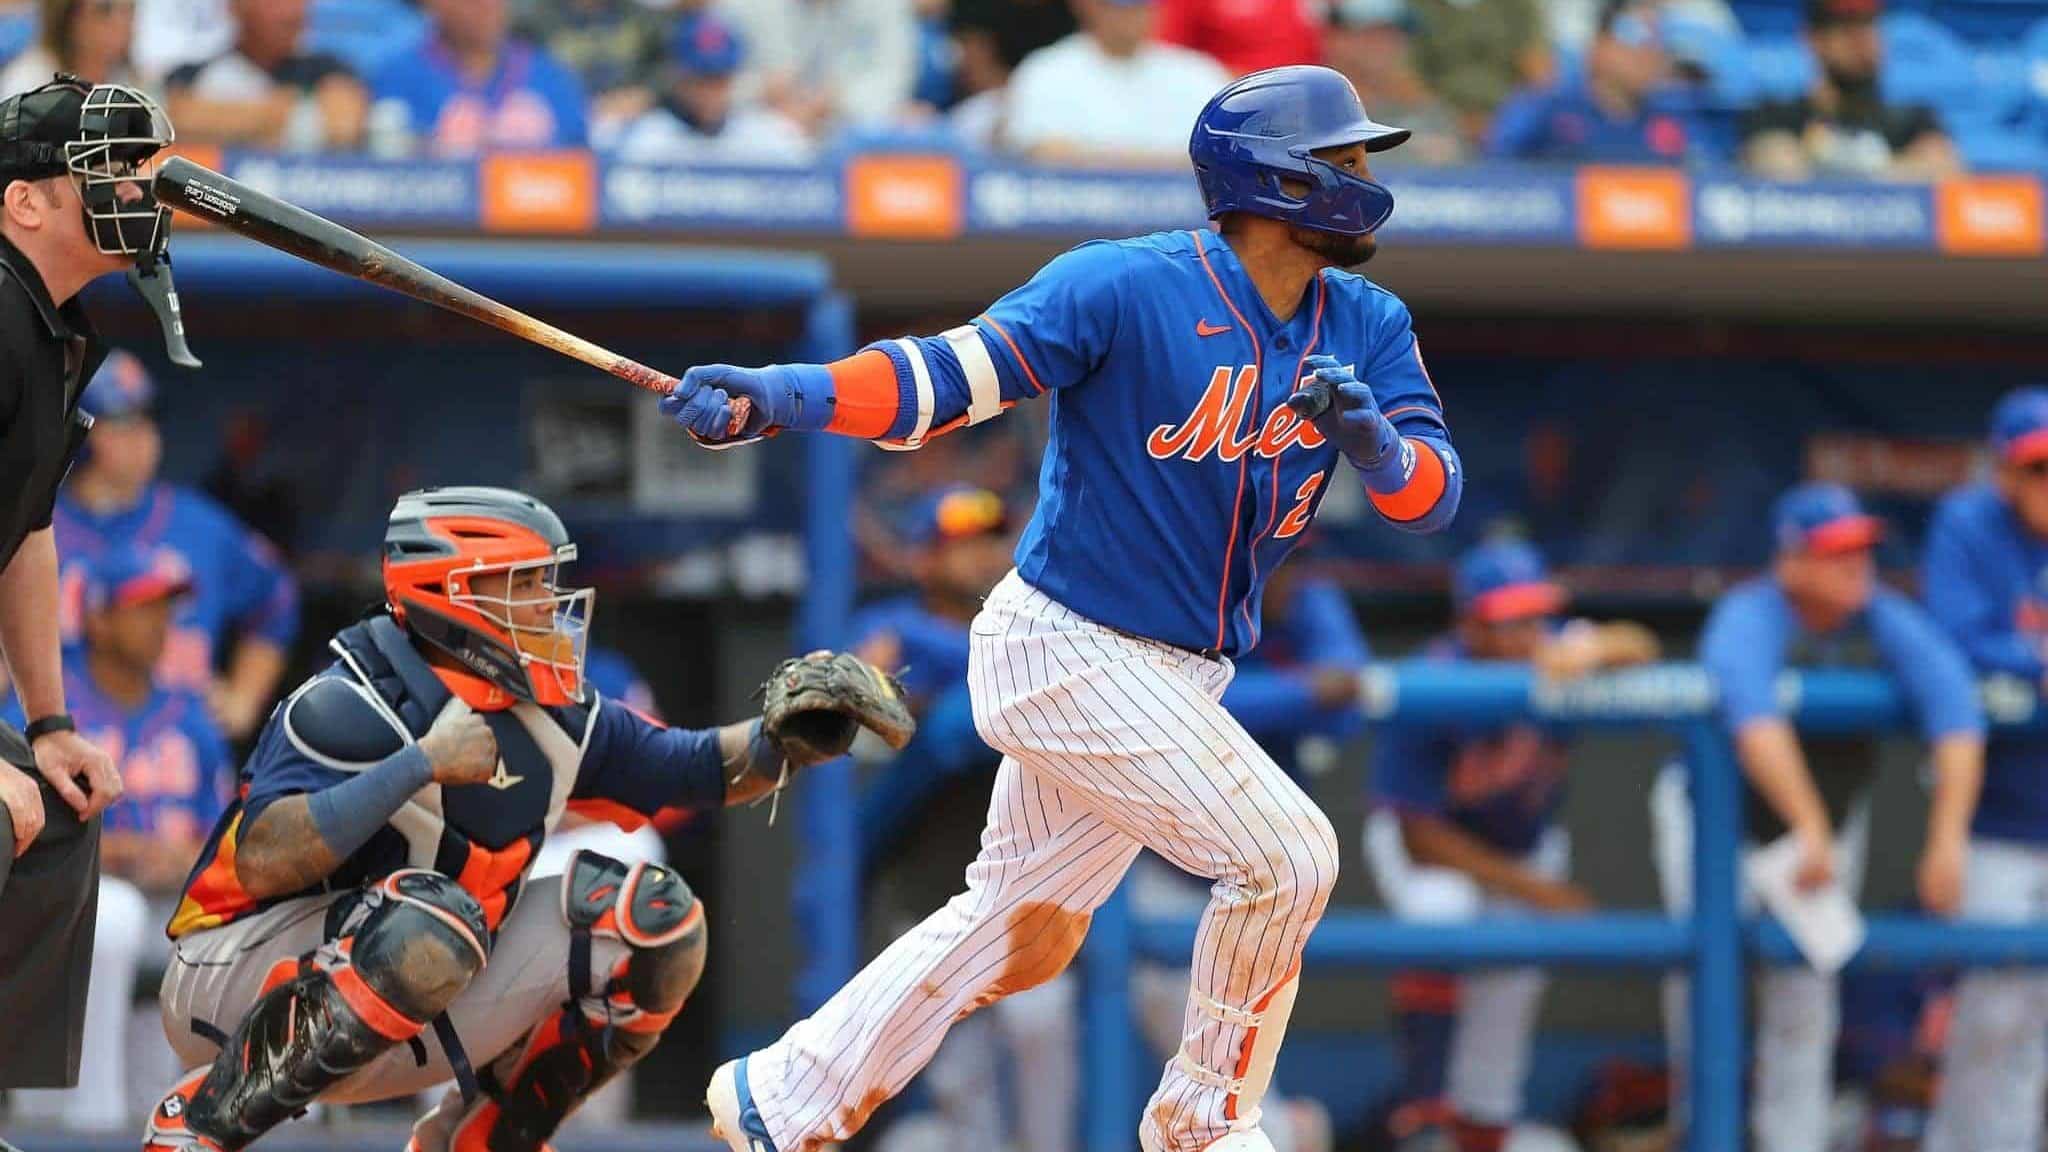 PORT ST. LUCIE, FL - MARCH 08: Robinson Cano #24 of the New York Mets hits an RBI double against the Houston Astros during the fifth inning of a spring training baseball game at Clover Park on March 8, 2020 in Port St. Lucie, Florida. The Mets defeated the Astros 3-1.